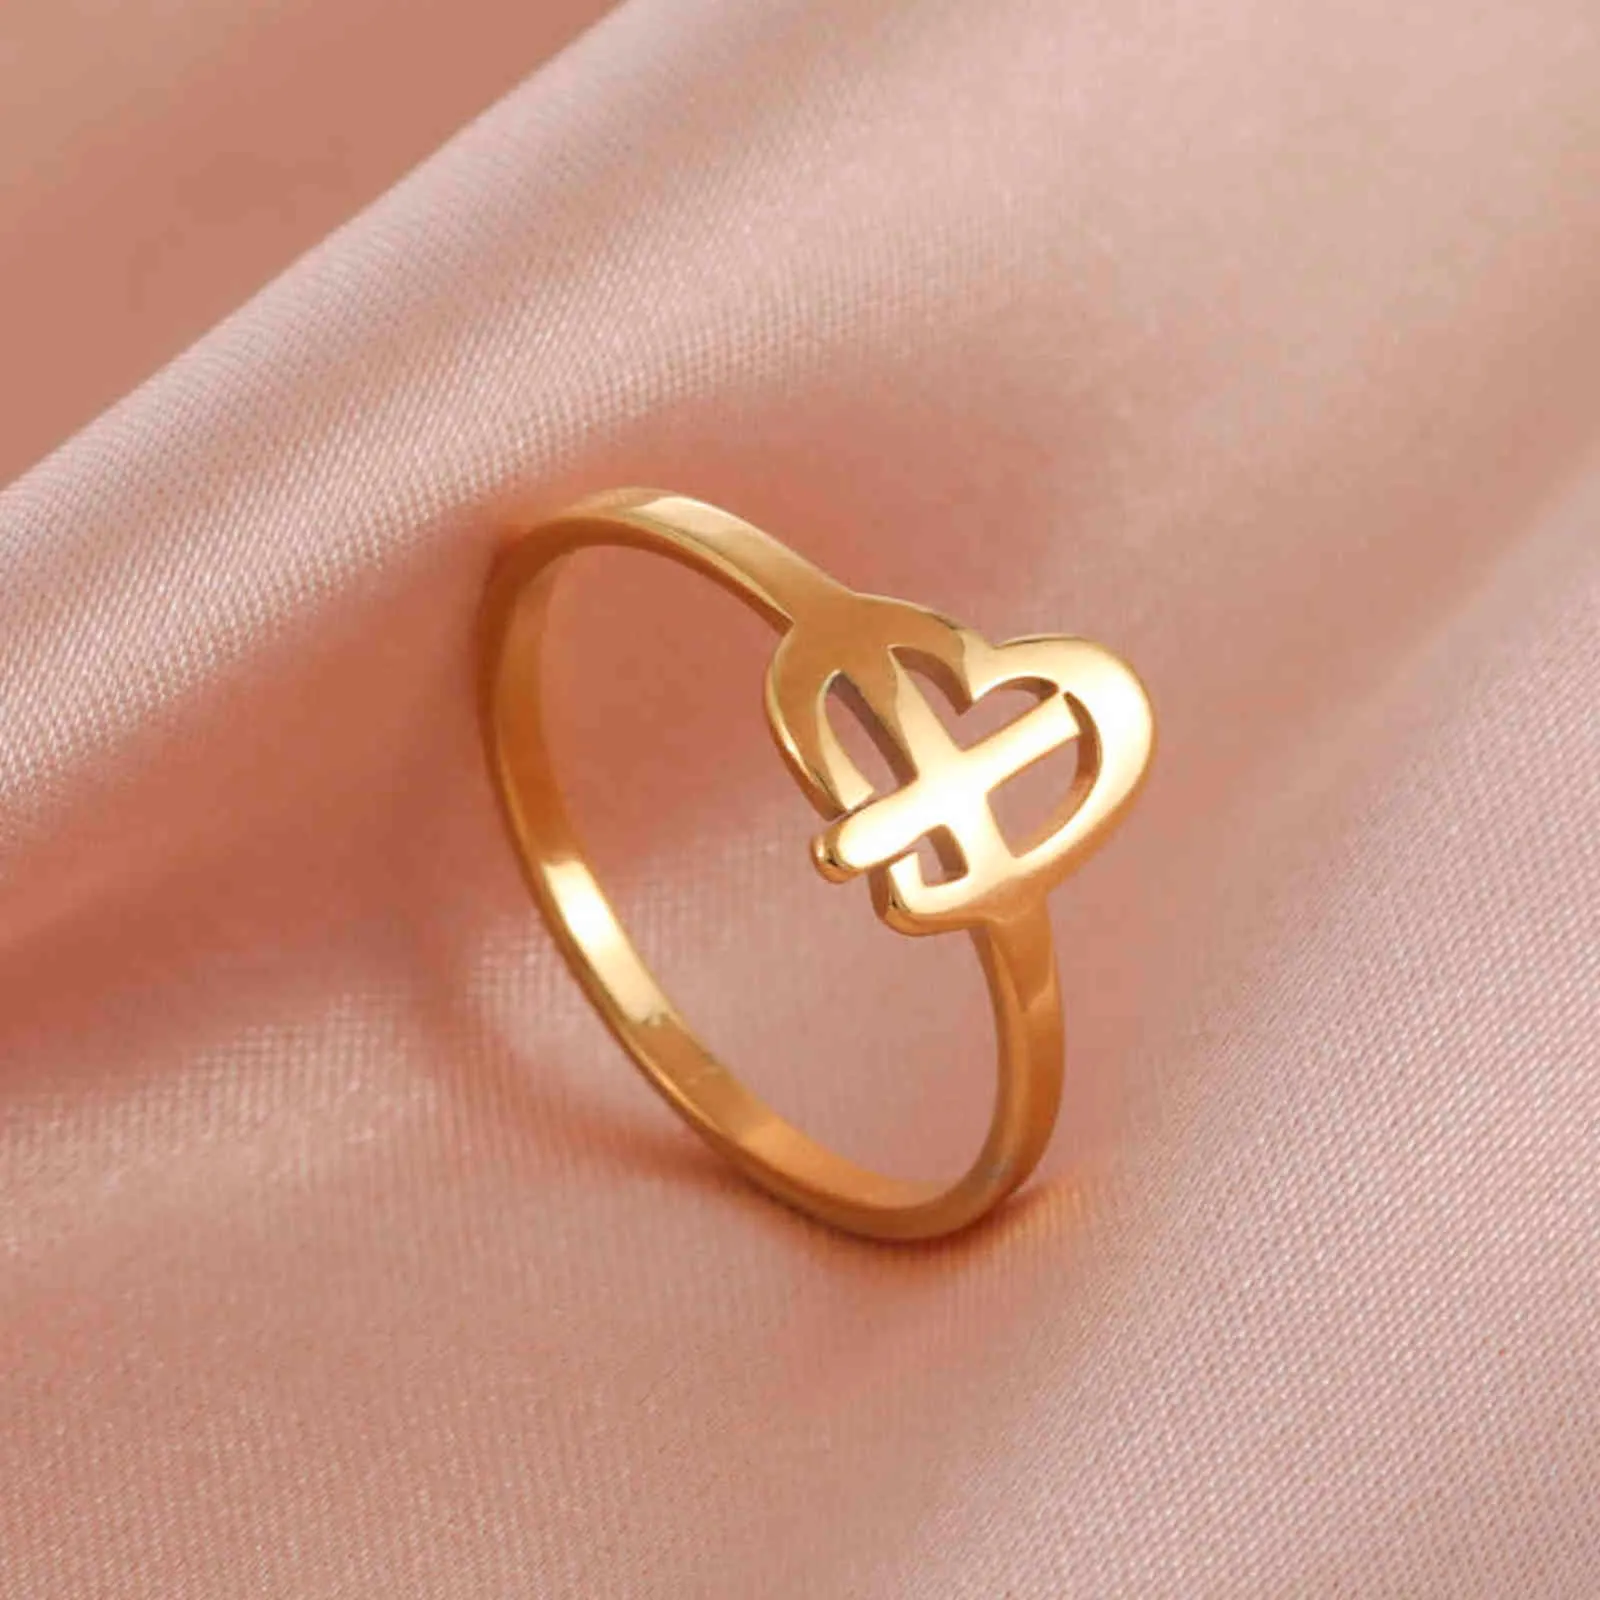 Lucktune Stainless Steel Minimalist Love Ring Woman Men Cute Paw Cross Rings Jewelry for Couple Wedding Engagement Anniversary G1125